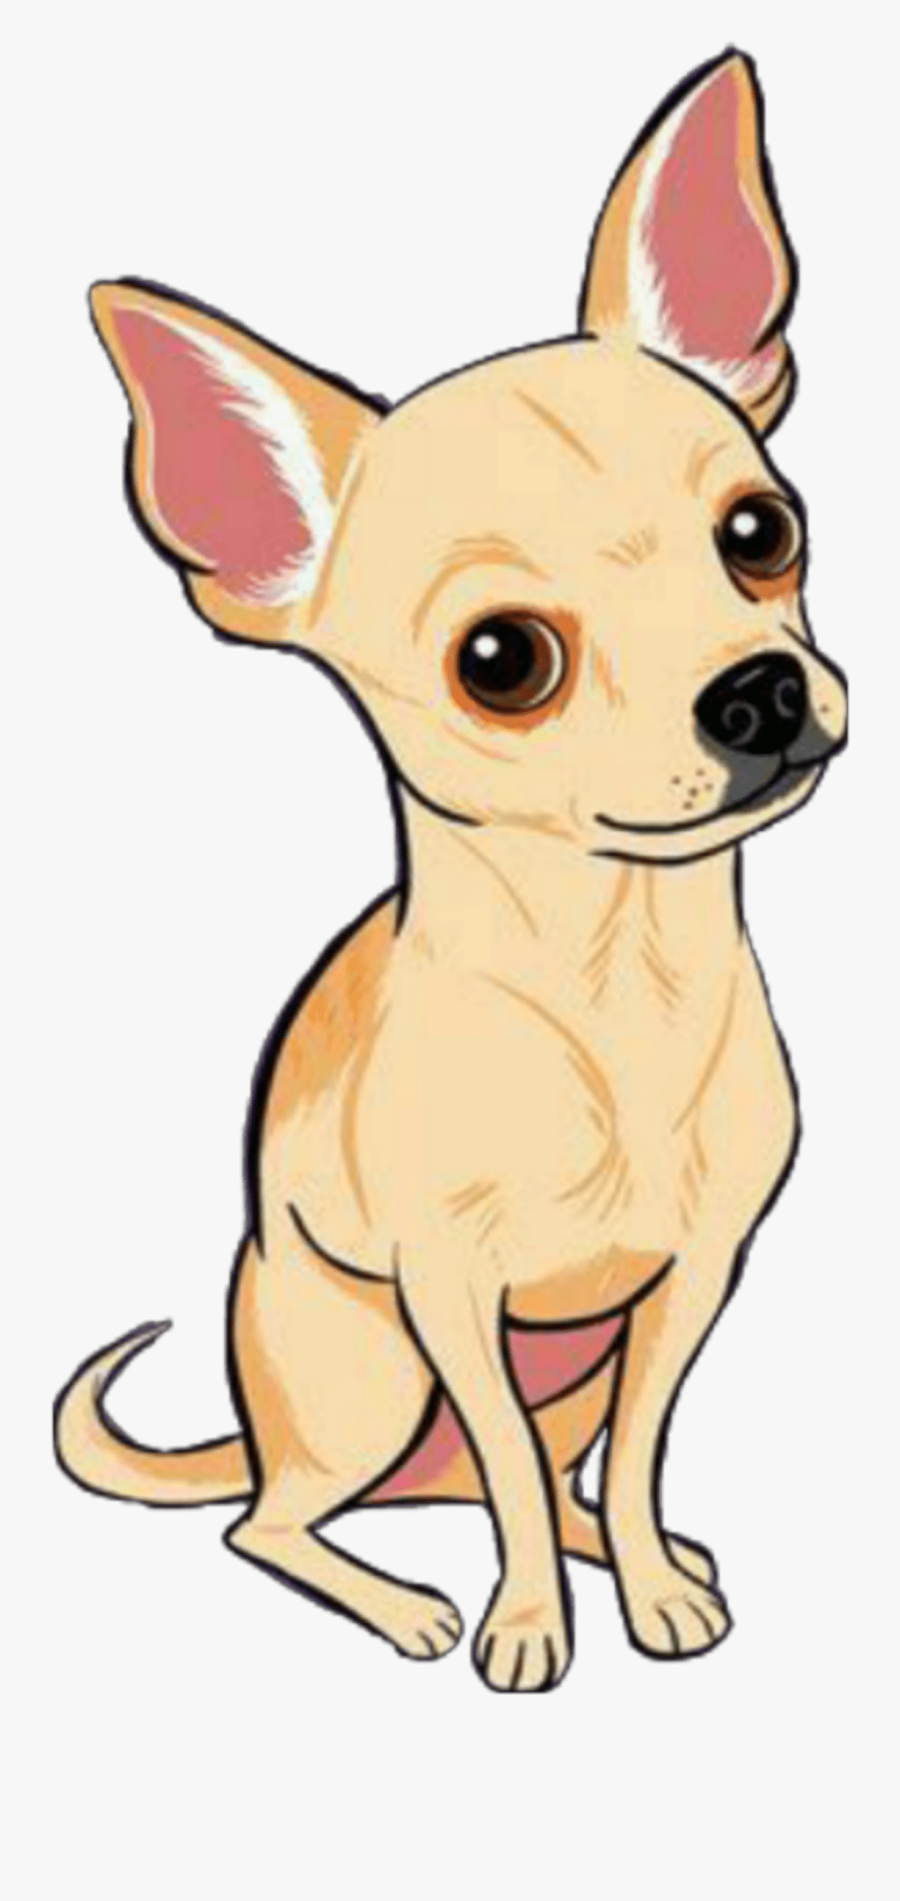 #ftestickers #clipart #dog #puppy #chihuahua #cute - Cute Chihuahua Clip Art, Transparent Clipart